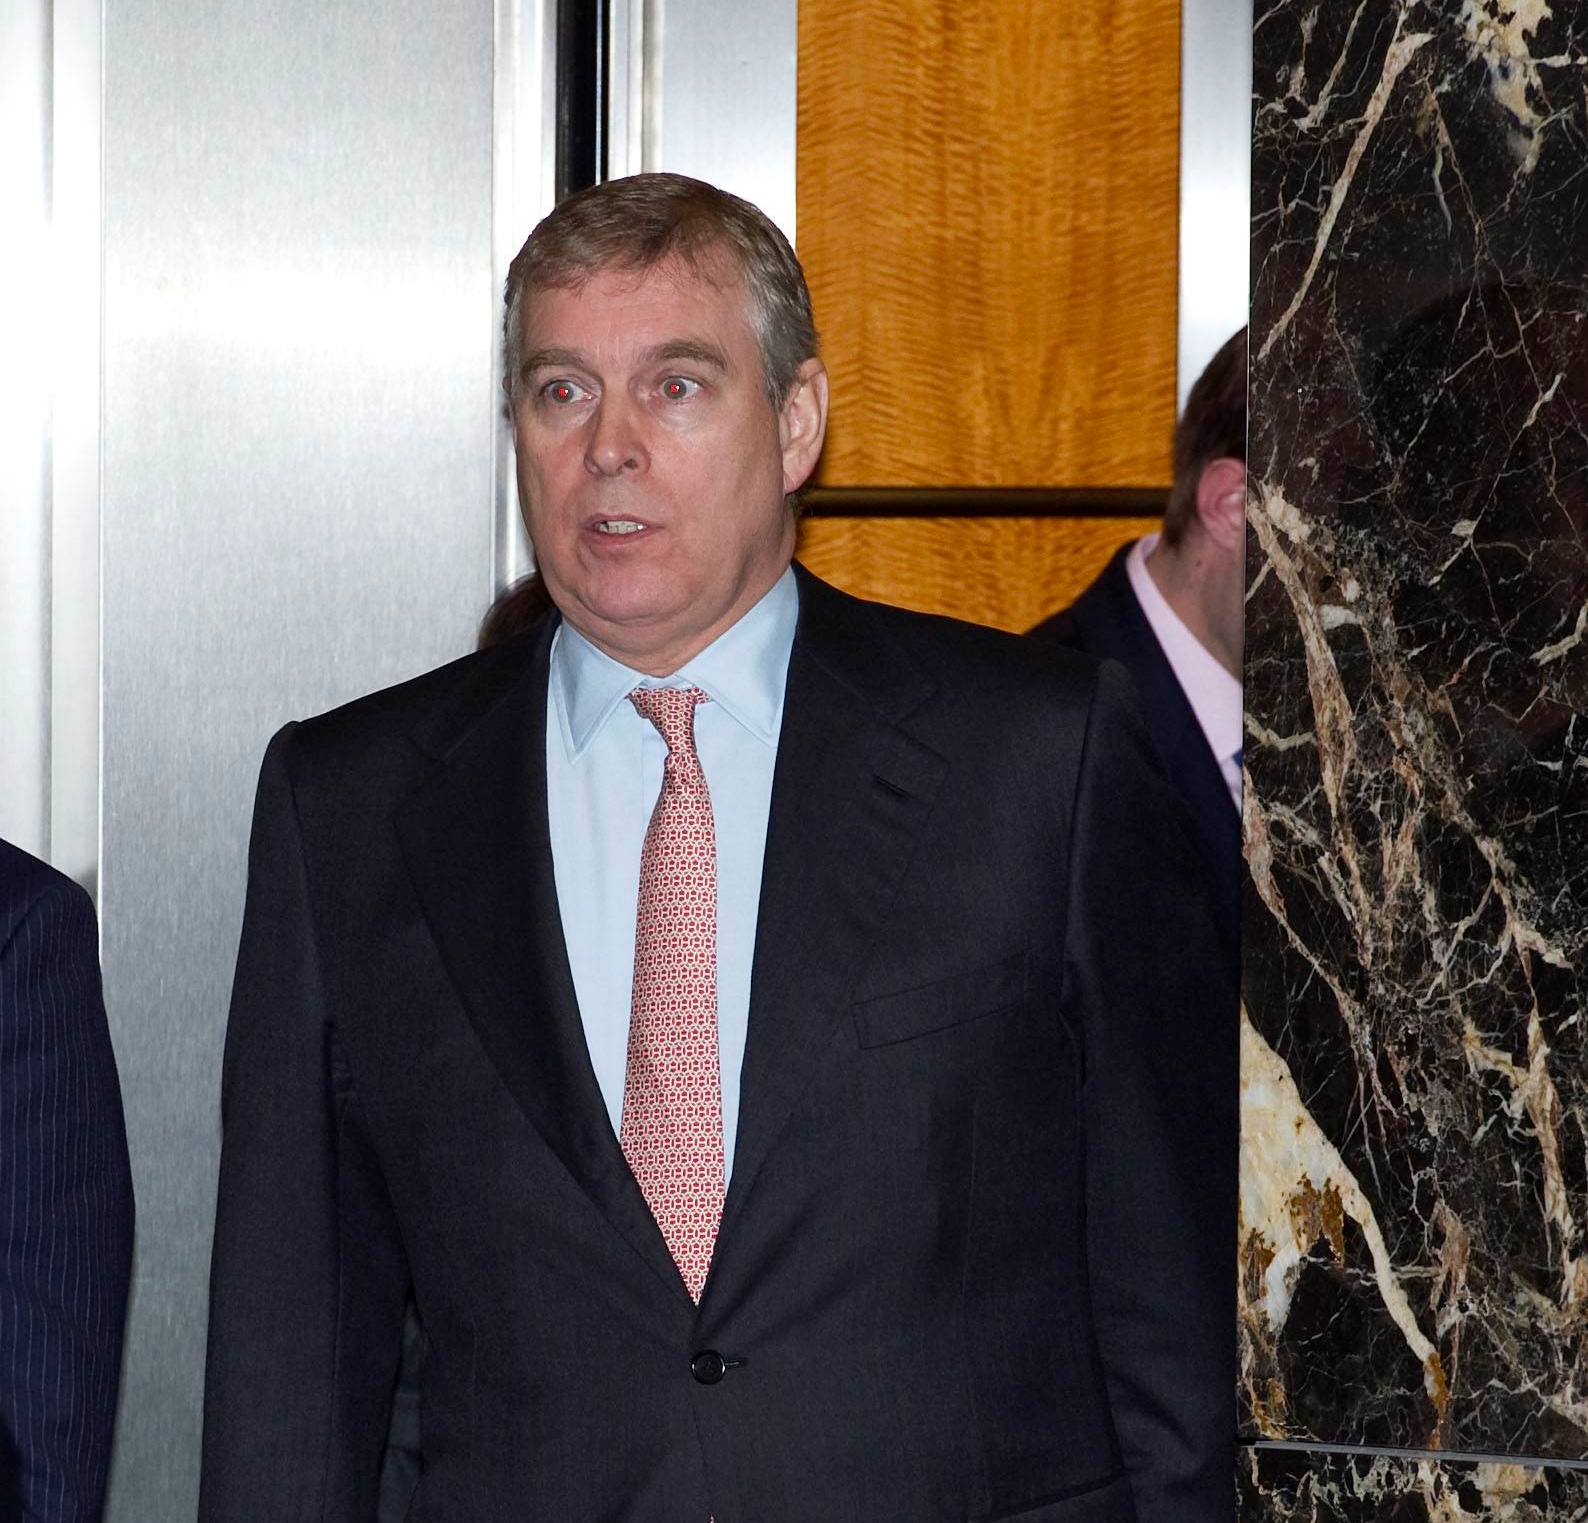 Prince Andrew leaving the headquarters of Crossrail at Canary Wharf